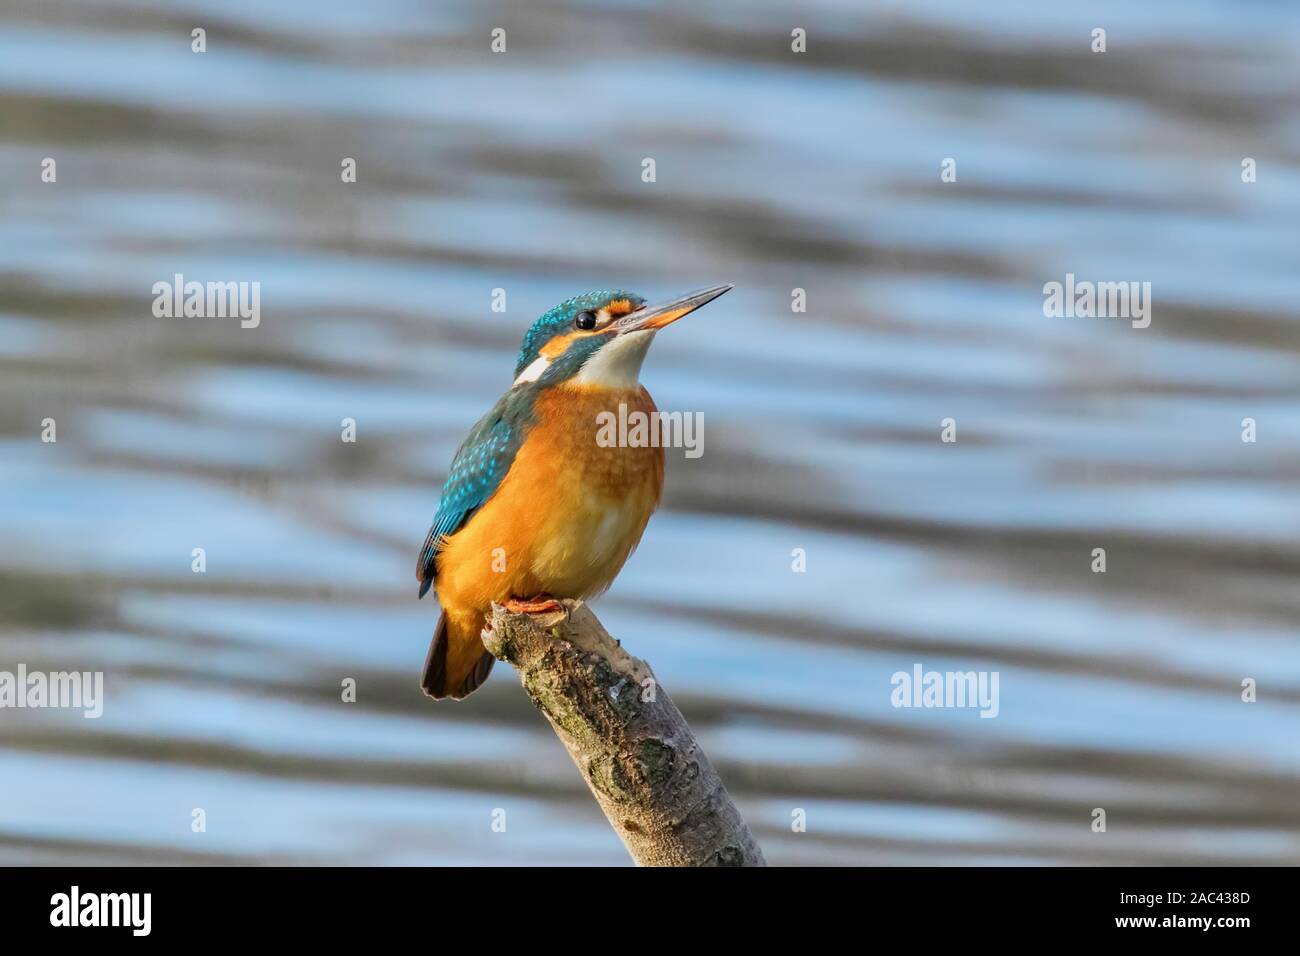 Common Kingfisher (Alcedo atthis) Kingfisher Bird sitting on a Branch Stock Photo